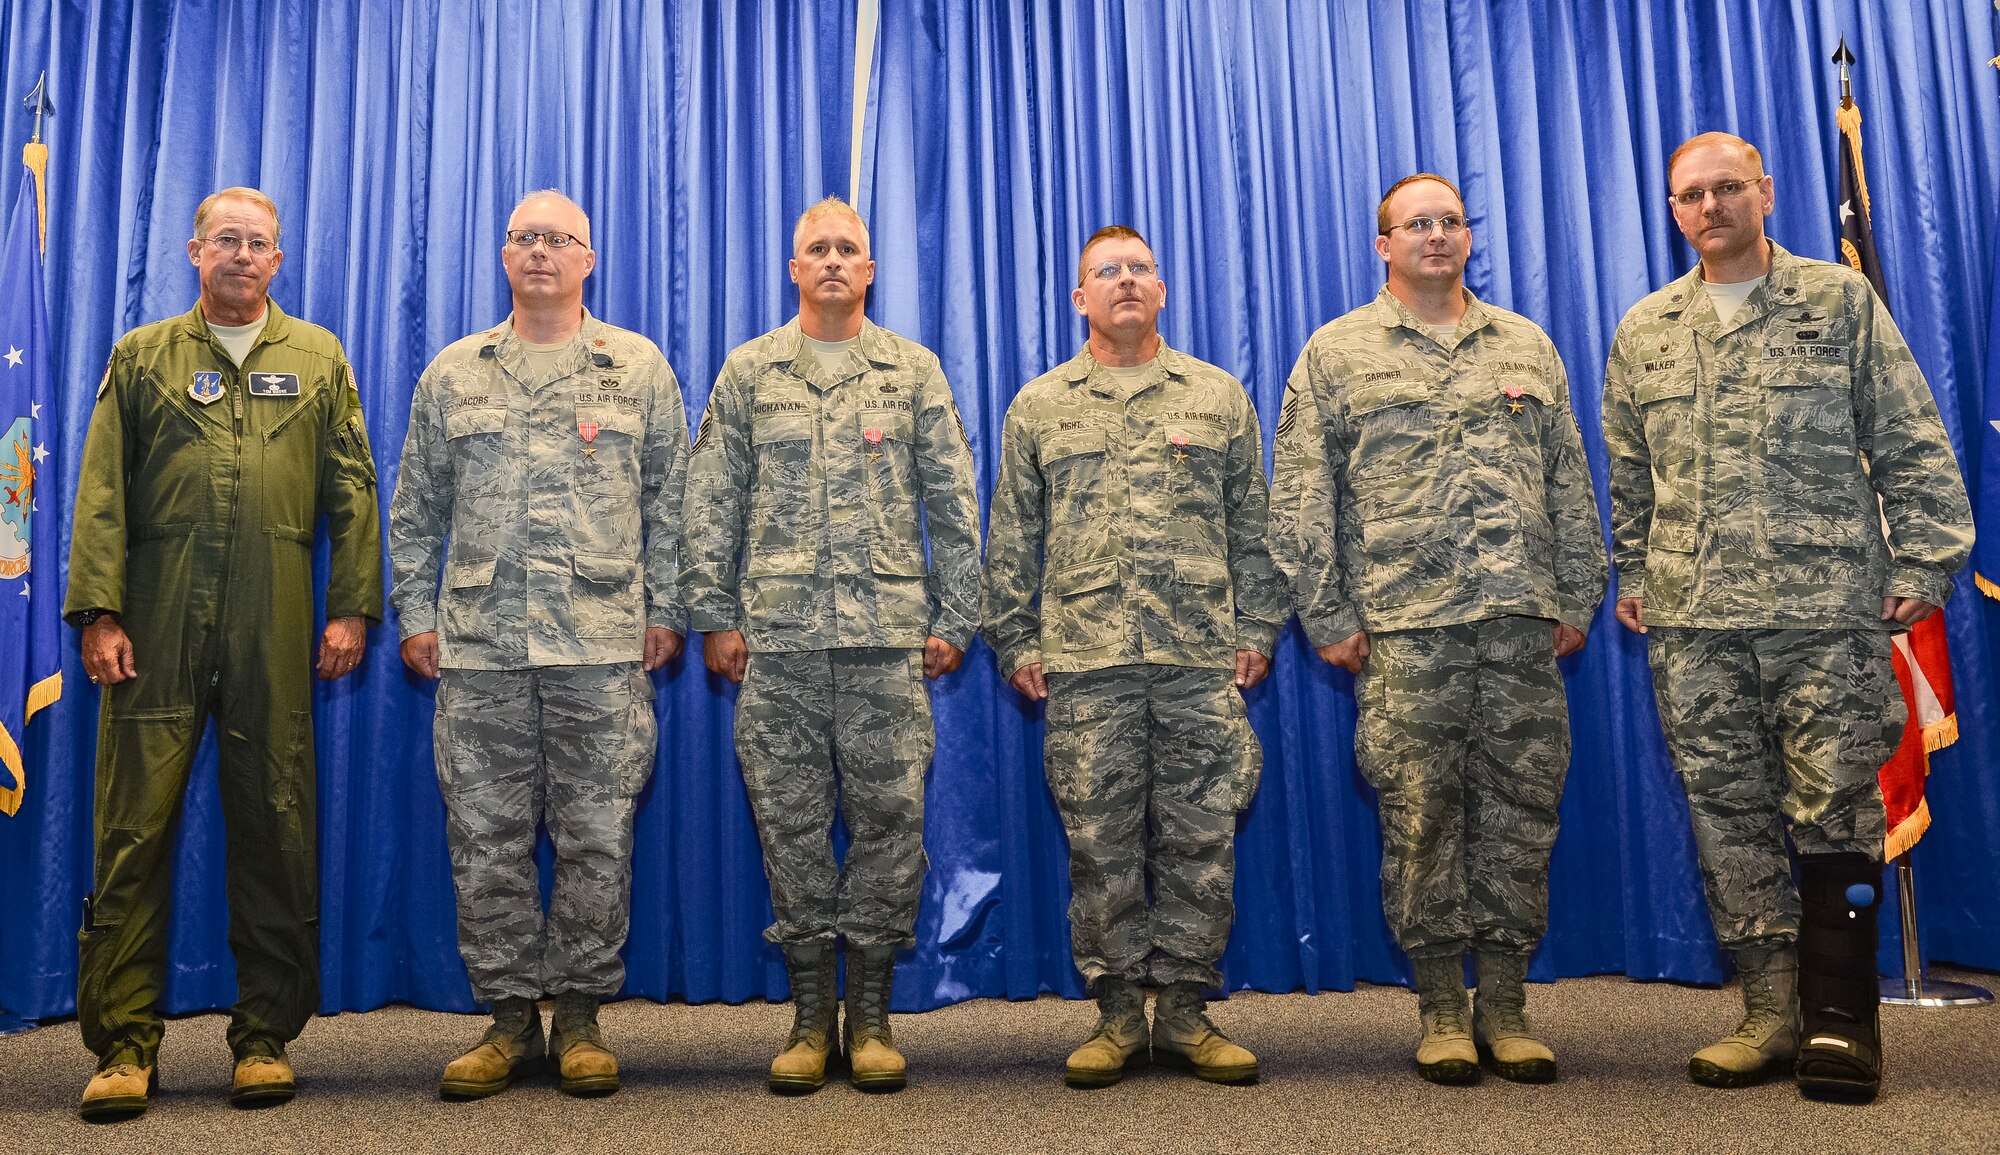 U.S. Air Force Maj. Gen. Thomas Moore, left, commander of the Georgia Air National Guard, and Lt. Col. Fred Walker, commander of the 202nd Engineering Installation Squadron (EIS), far right, pose with four members of the 202nd EIS after presenting them with Bronze Star medals during a Hometown Heroes Salute ceremony at Robins Air Force Base, Ga., July 13, 2014. Receiving the Bronze Star for meritorious service while deployed to Afghanistan in support of the global war on terrorism were; Maj. Will Jacobs, 2nd from left, Senior Master Sgts. Mark Buchanan and George Kight and Master Sgt. Jason Gardner.   (U.S. Air National Guard photo by Master Sgt. Roger Parsons/Released)